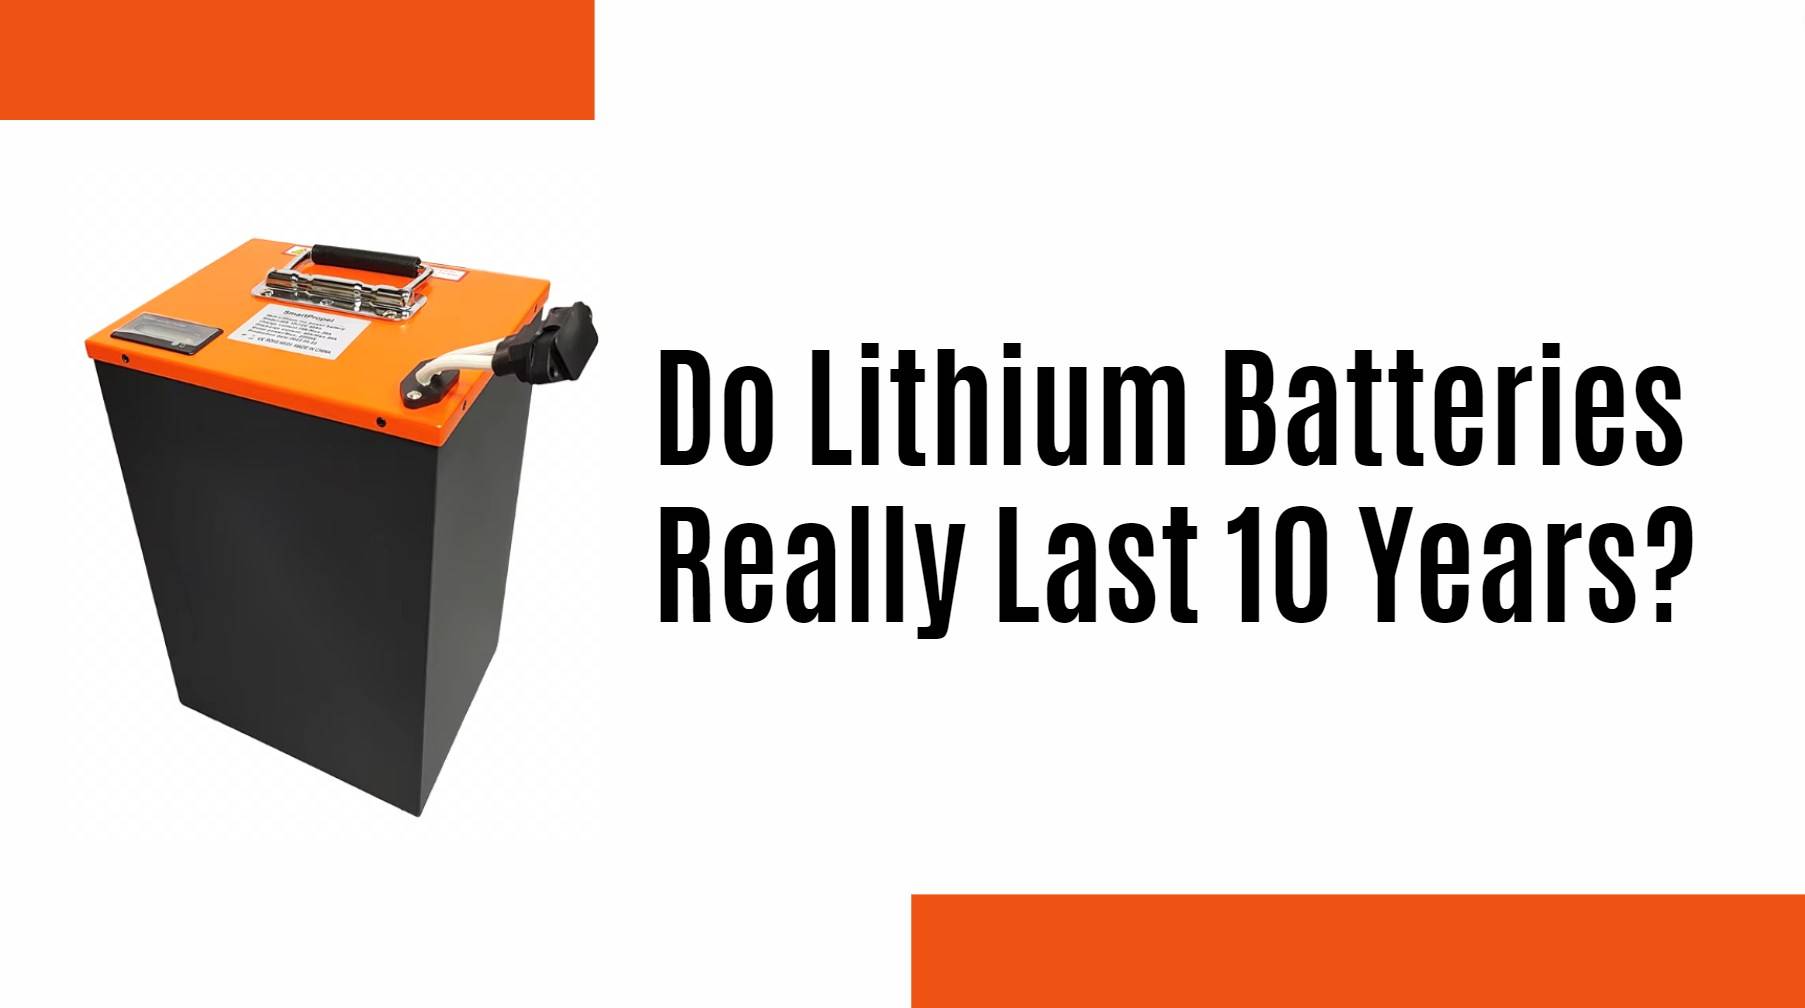 Do Lithium Batteries Really Last 10 Years?